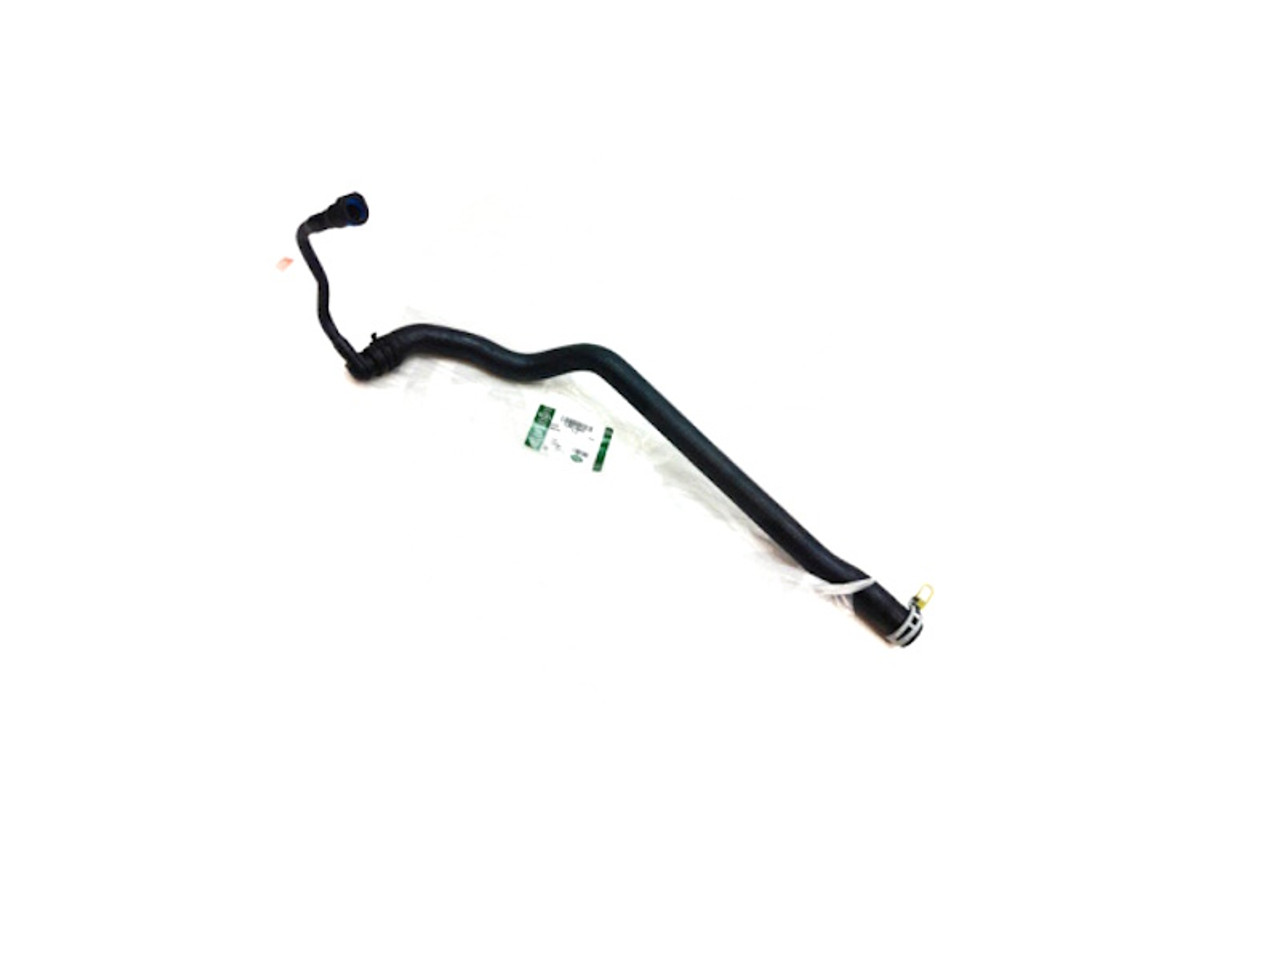 Genuine Discovery 4 and Range Rover Sport 3.0 Radiator to Fuel Cooler Hose - LR013691